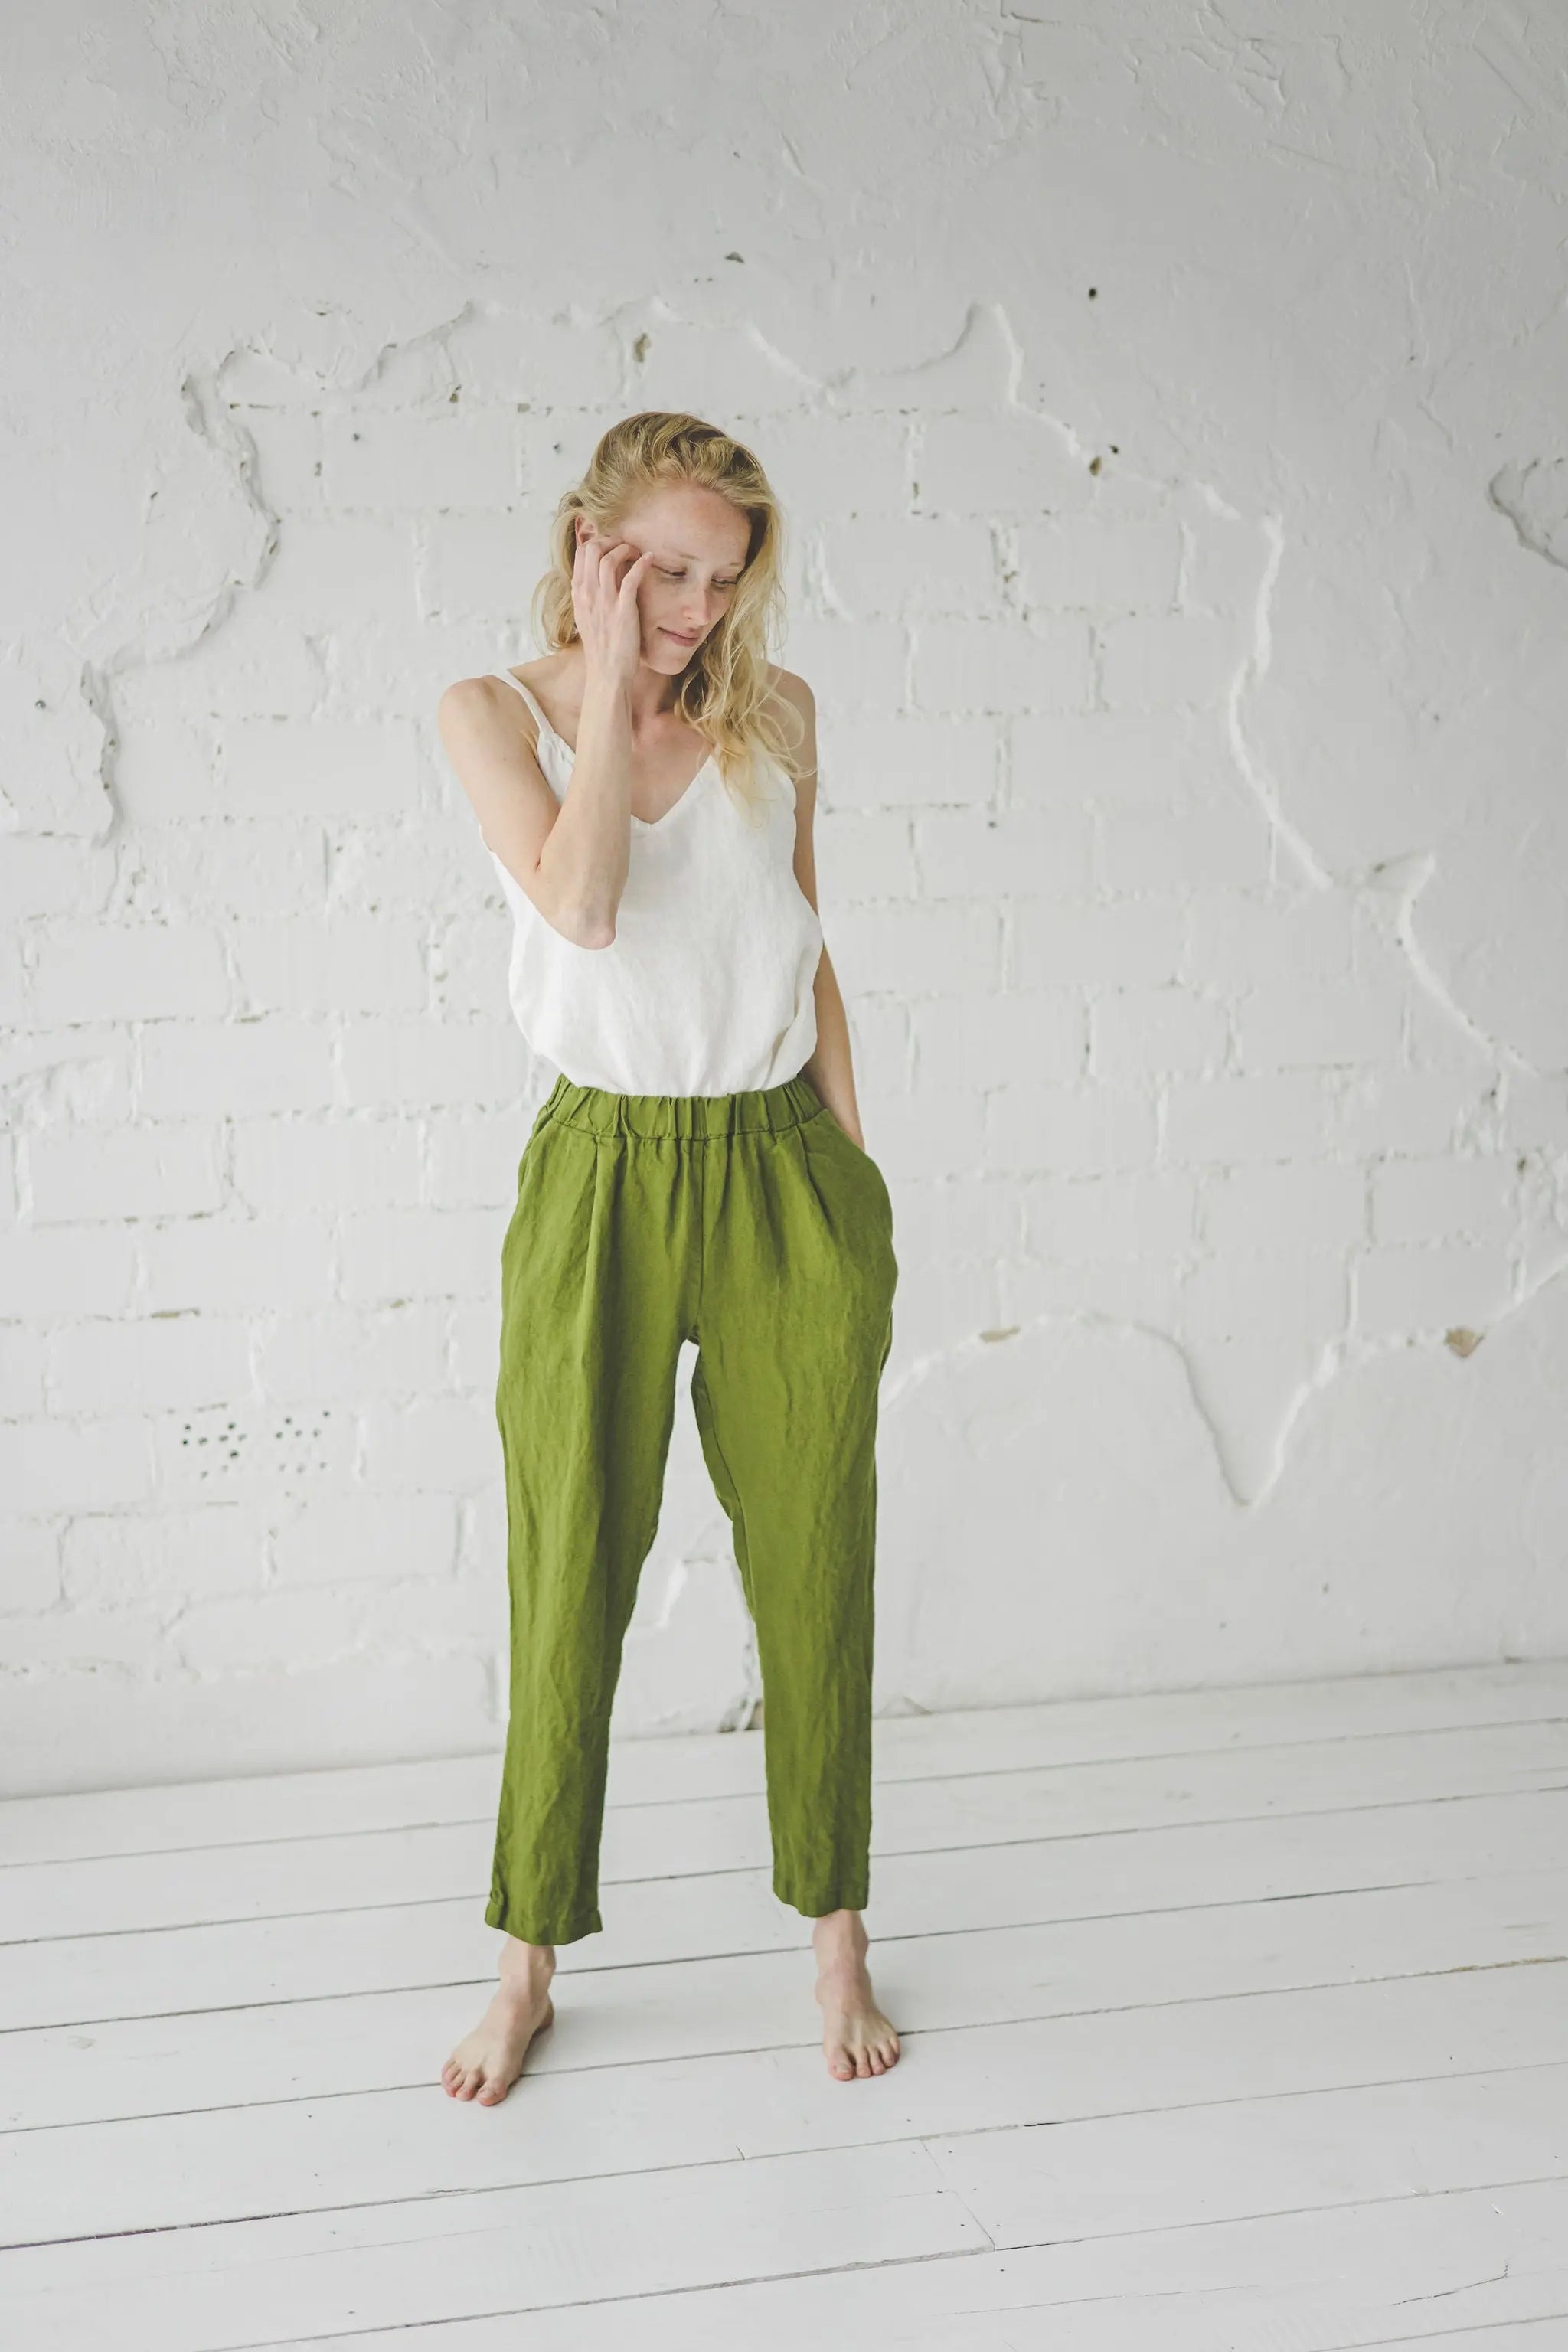 Tapered Linen Pants - Epic Linen conscious fashion